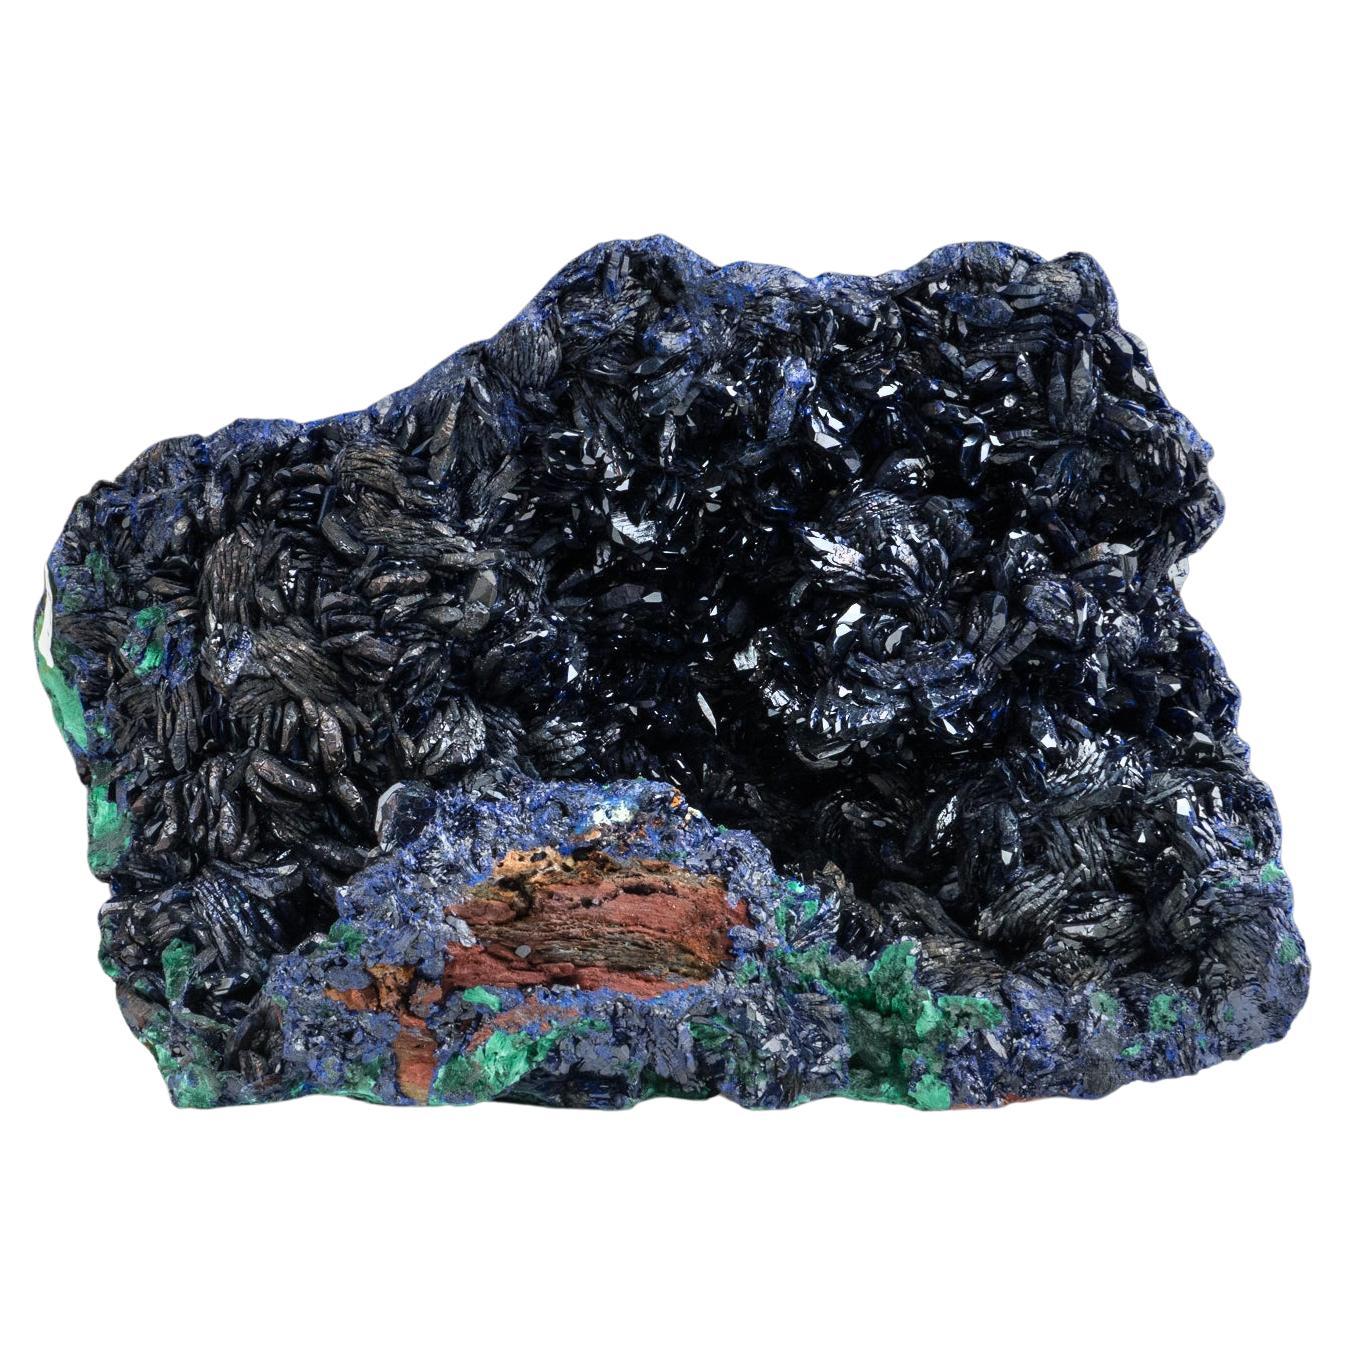 Azurite Mineral Crystal with Malachite from Anhui, China